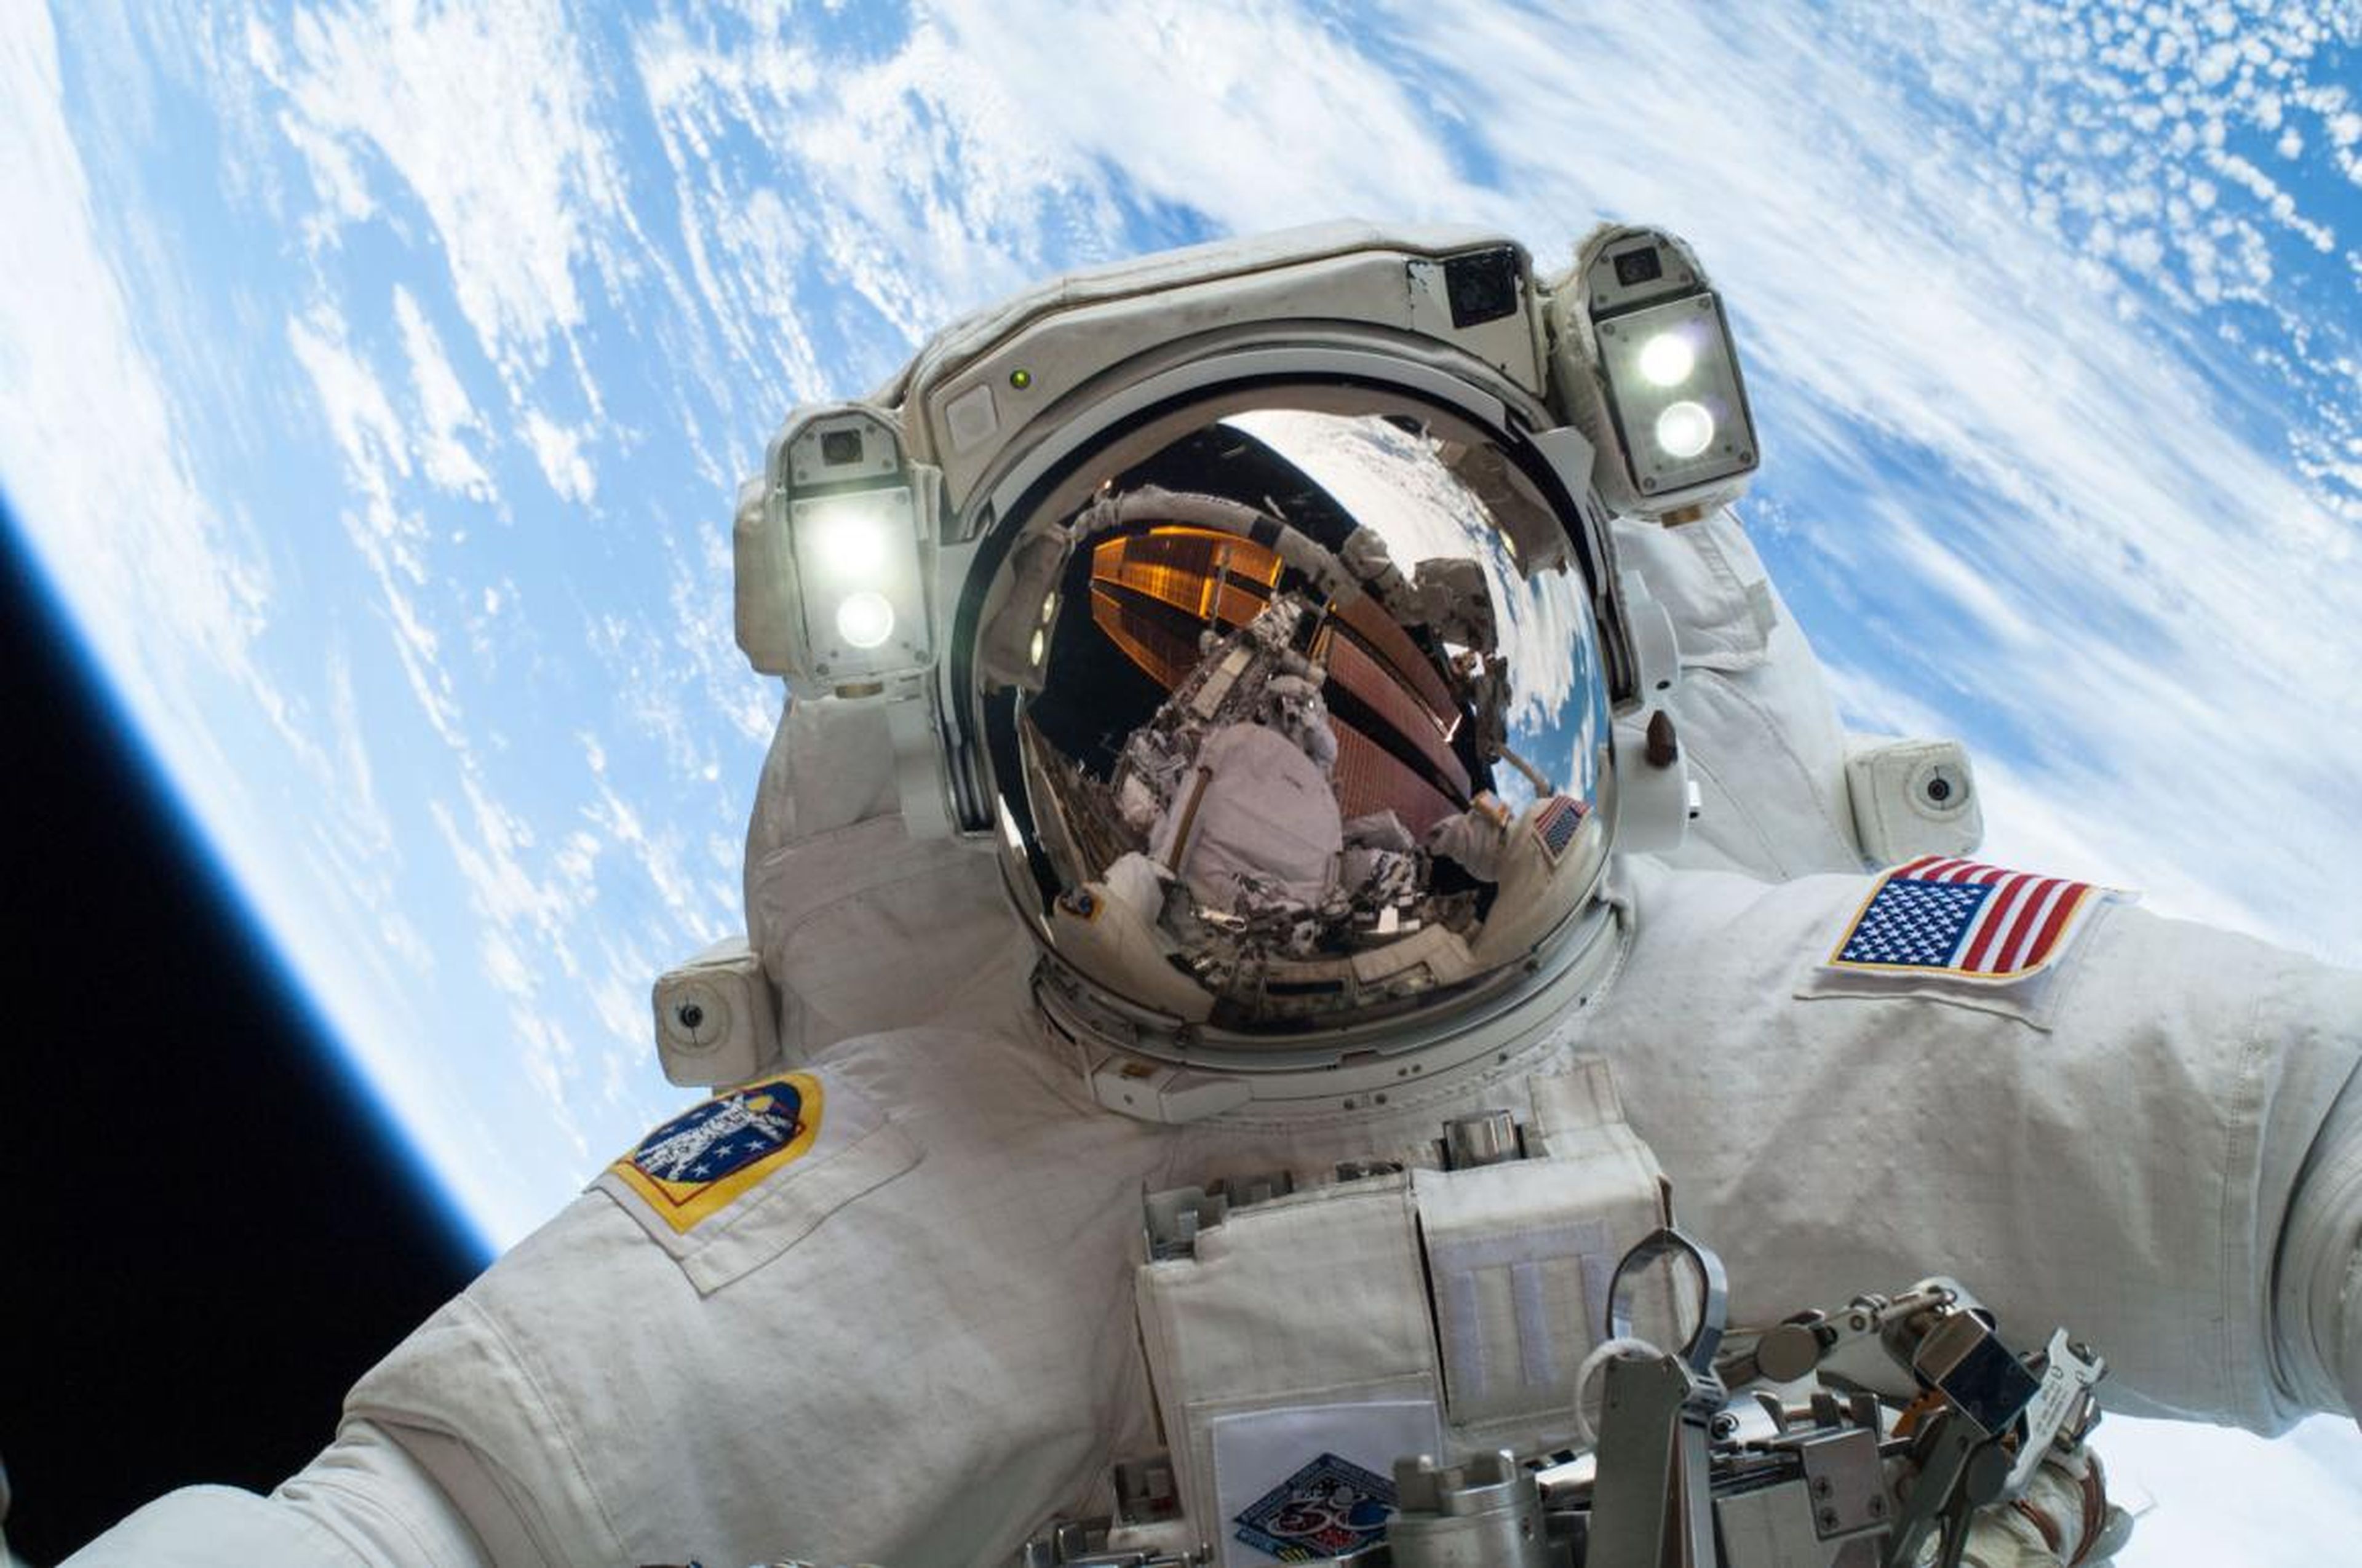 NASA astronaut Mike Hopkins in a spacesuit outside the International Space Station on Dec. 24, 2013.